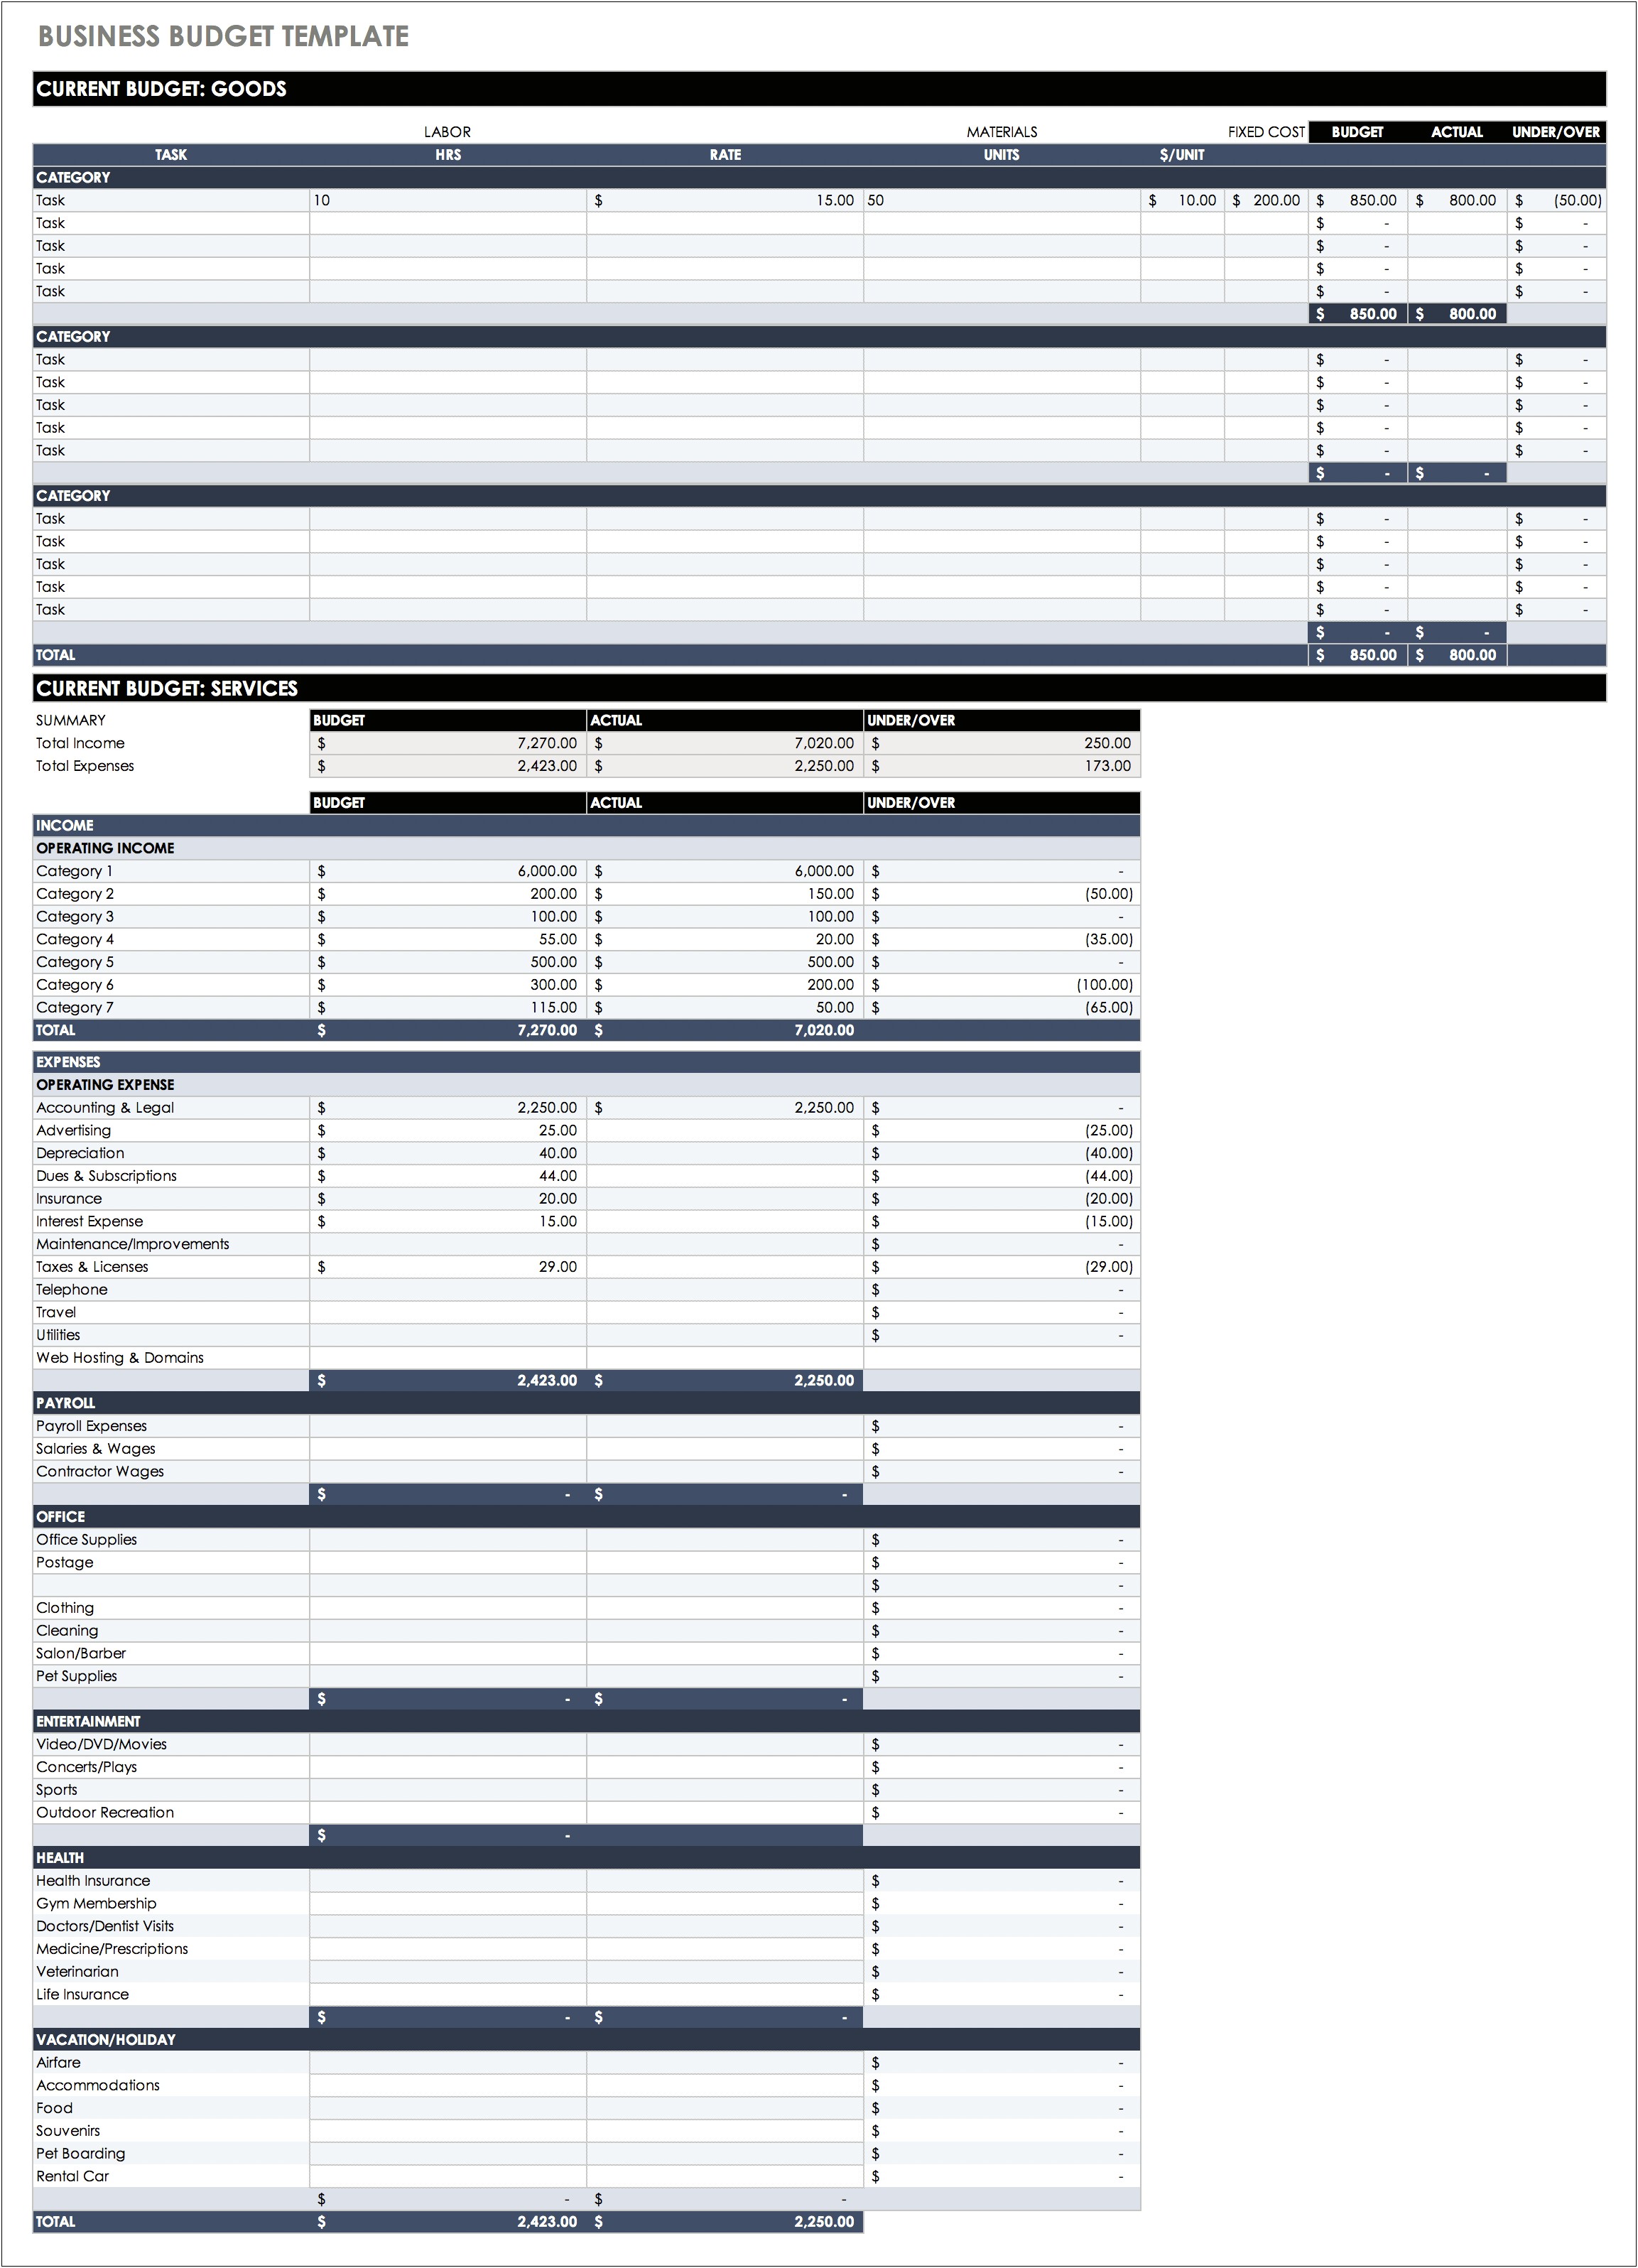 Free Business Plan Budget Template Excel